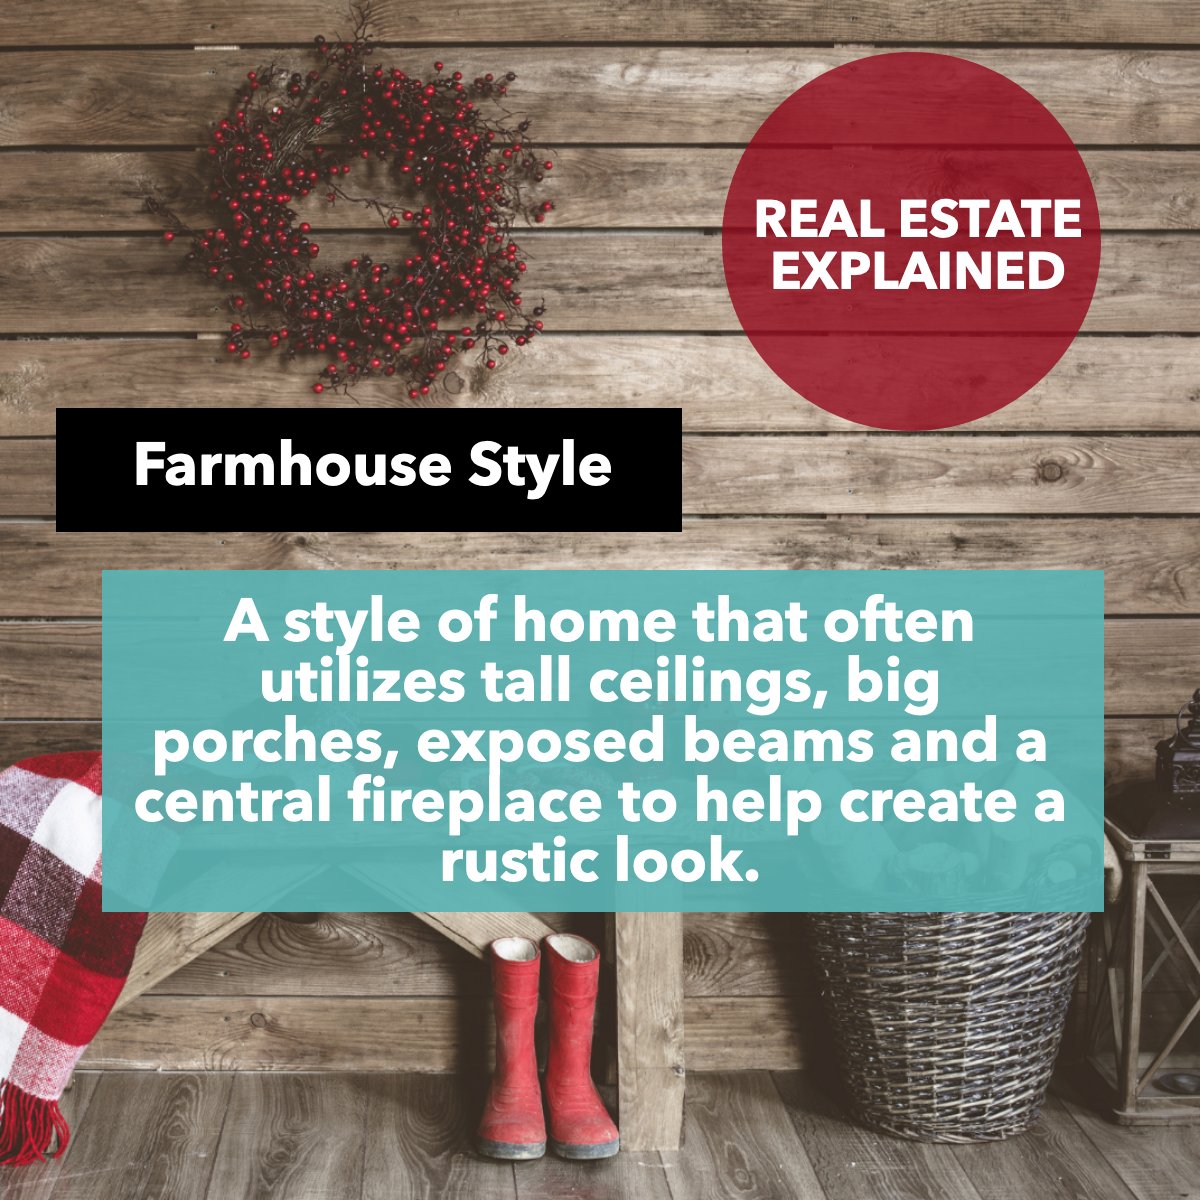 Did you know what a Farmhouse Style is? 🏡

Is this the type of house that you like?

#farmhousestylehome #farmhousestyledesign #farmhousestyleinspired #farmhouseismystyle
 #goodtogorealty